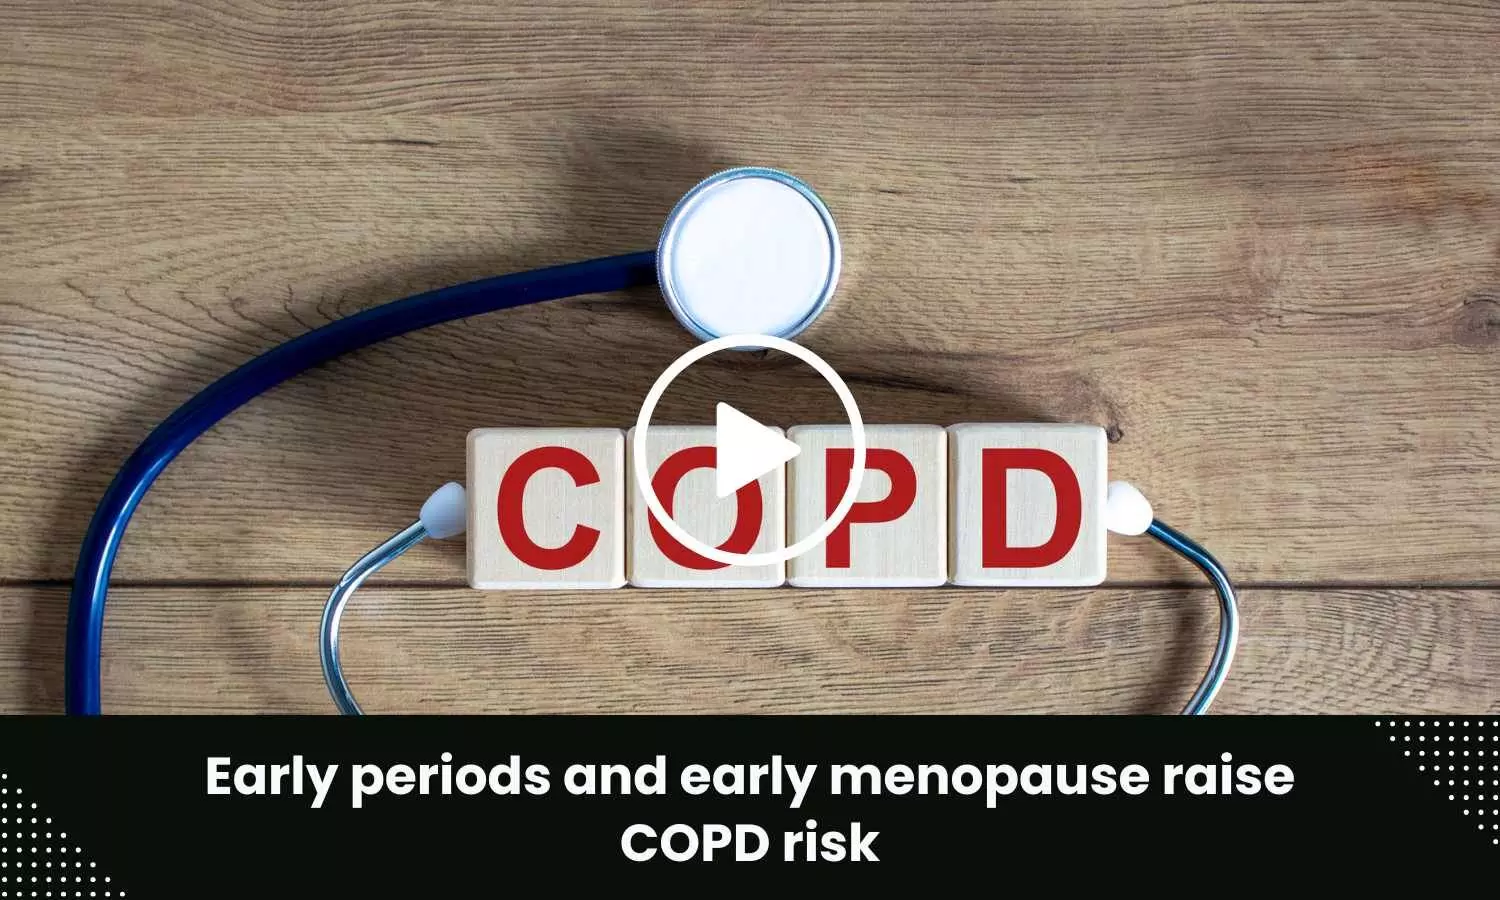 Early periods and early menopause raise COPD risk